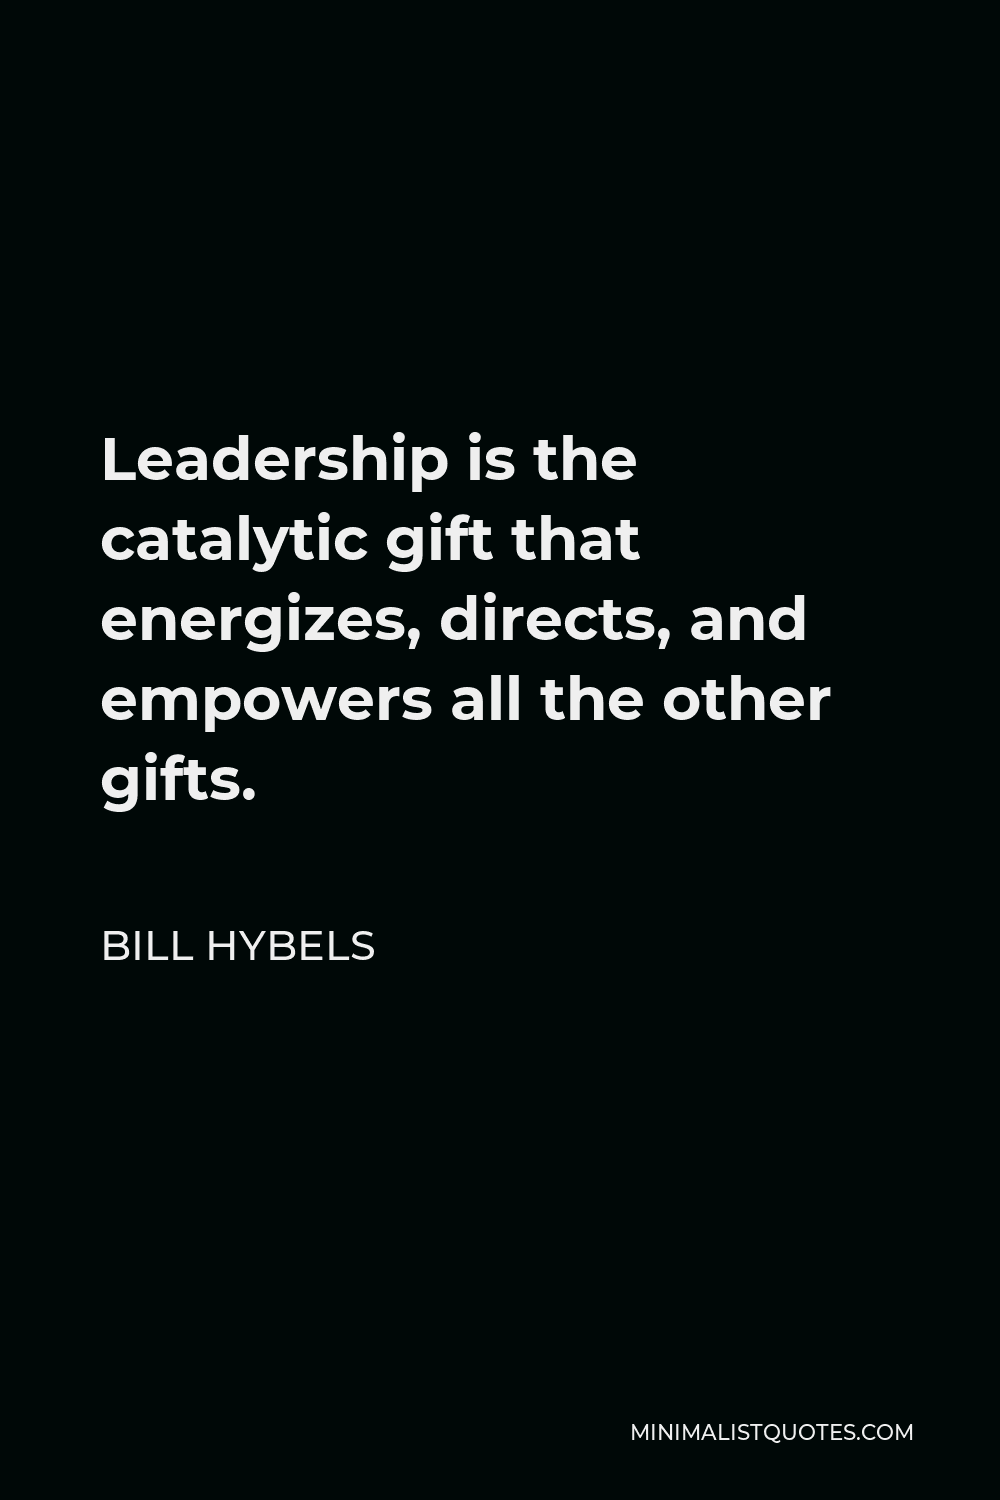 Bill Hybels Quote - Leadership is the catalytic gift that energizes, directs, and empowers all the other gifts.